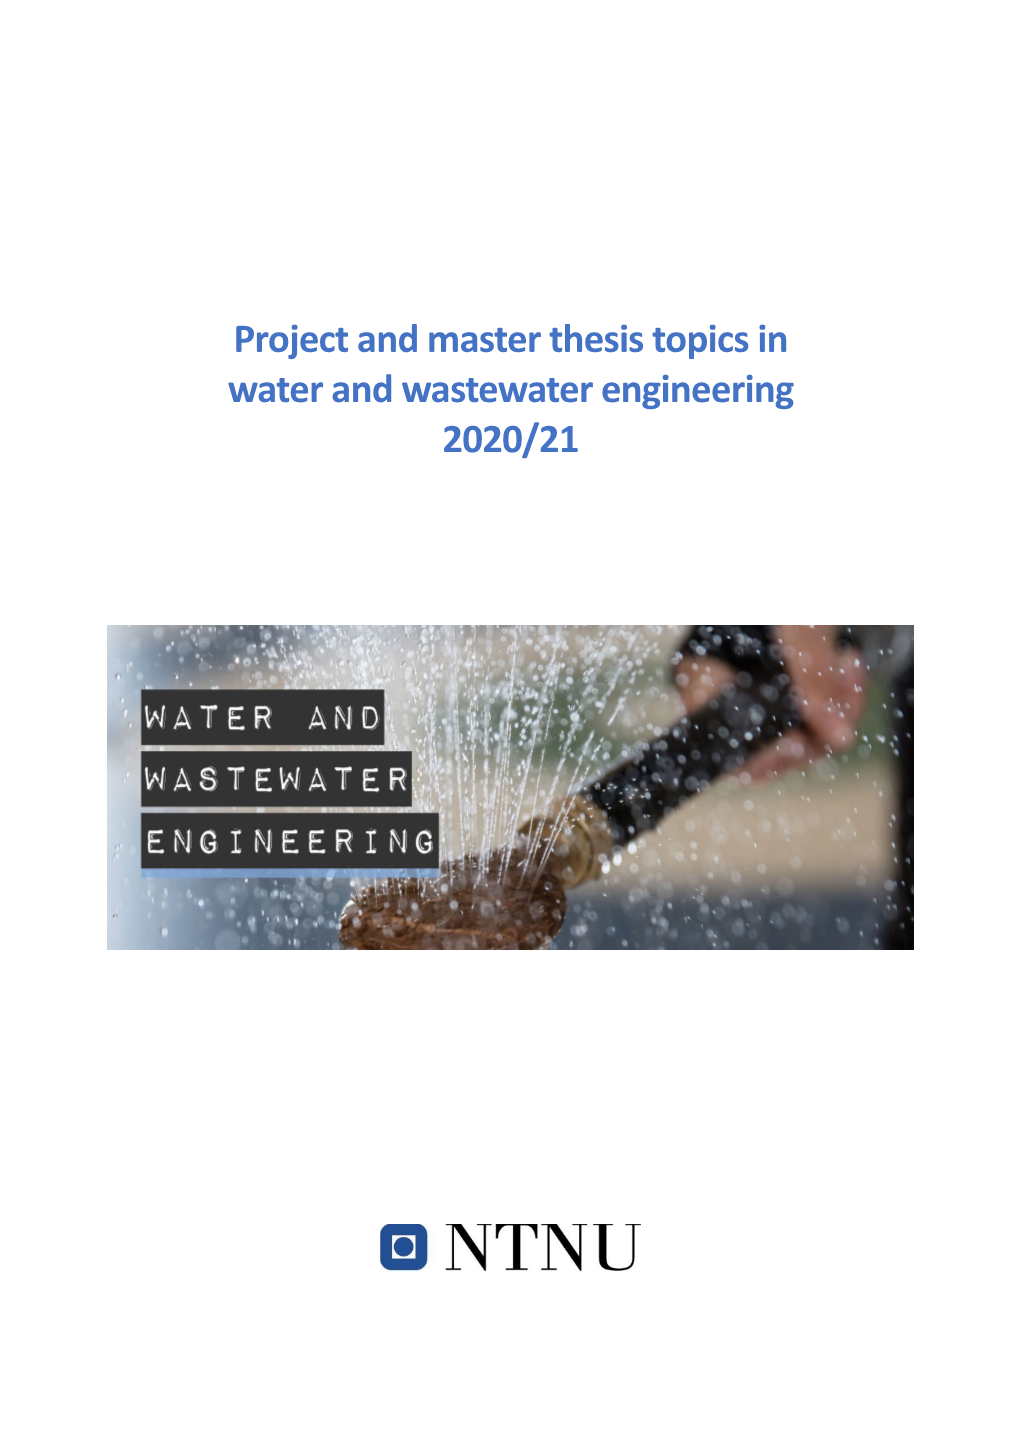 Project and Master Thesis Topics in Water and Wastewater Engineering 2020/21